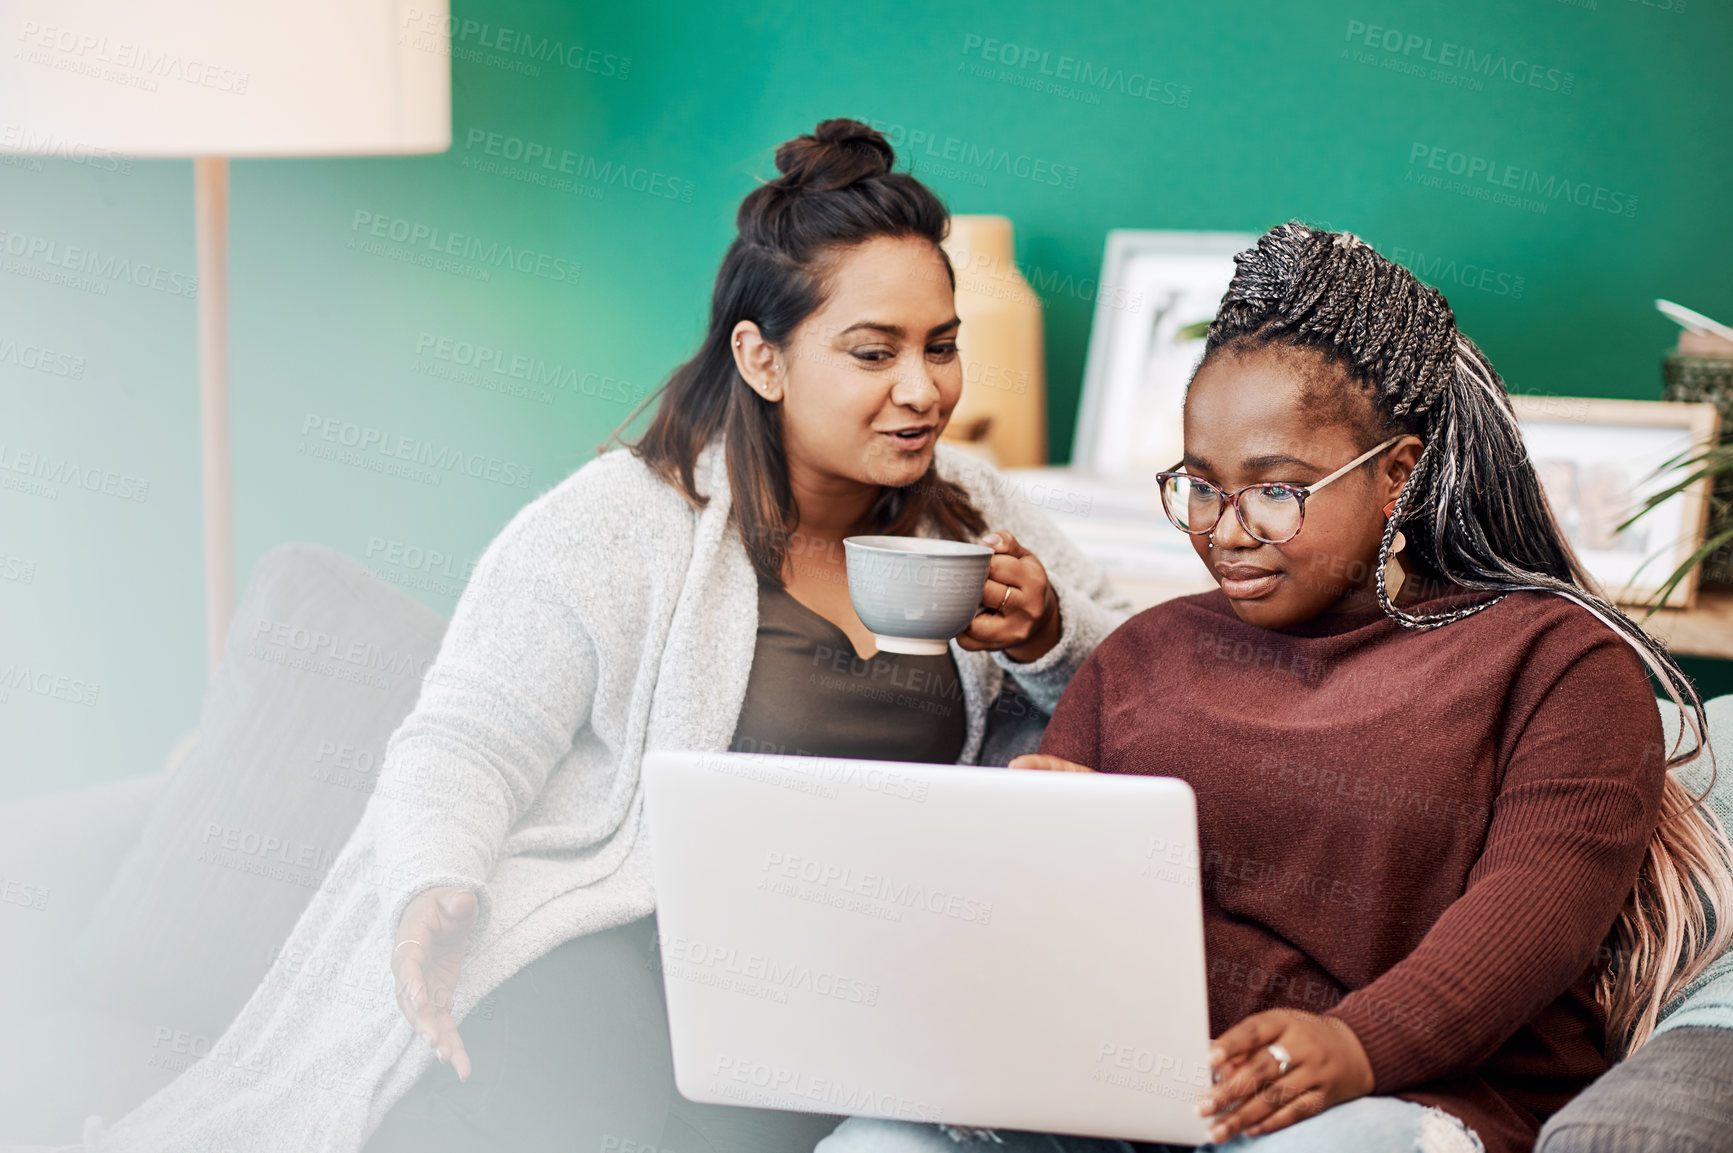 Buy stock photo Shot of two young women using a laptop on the sofa at home